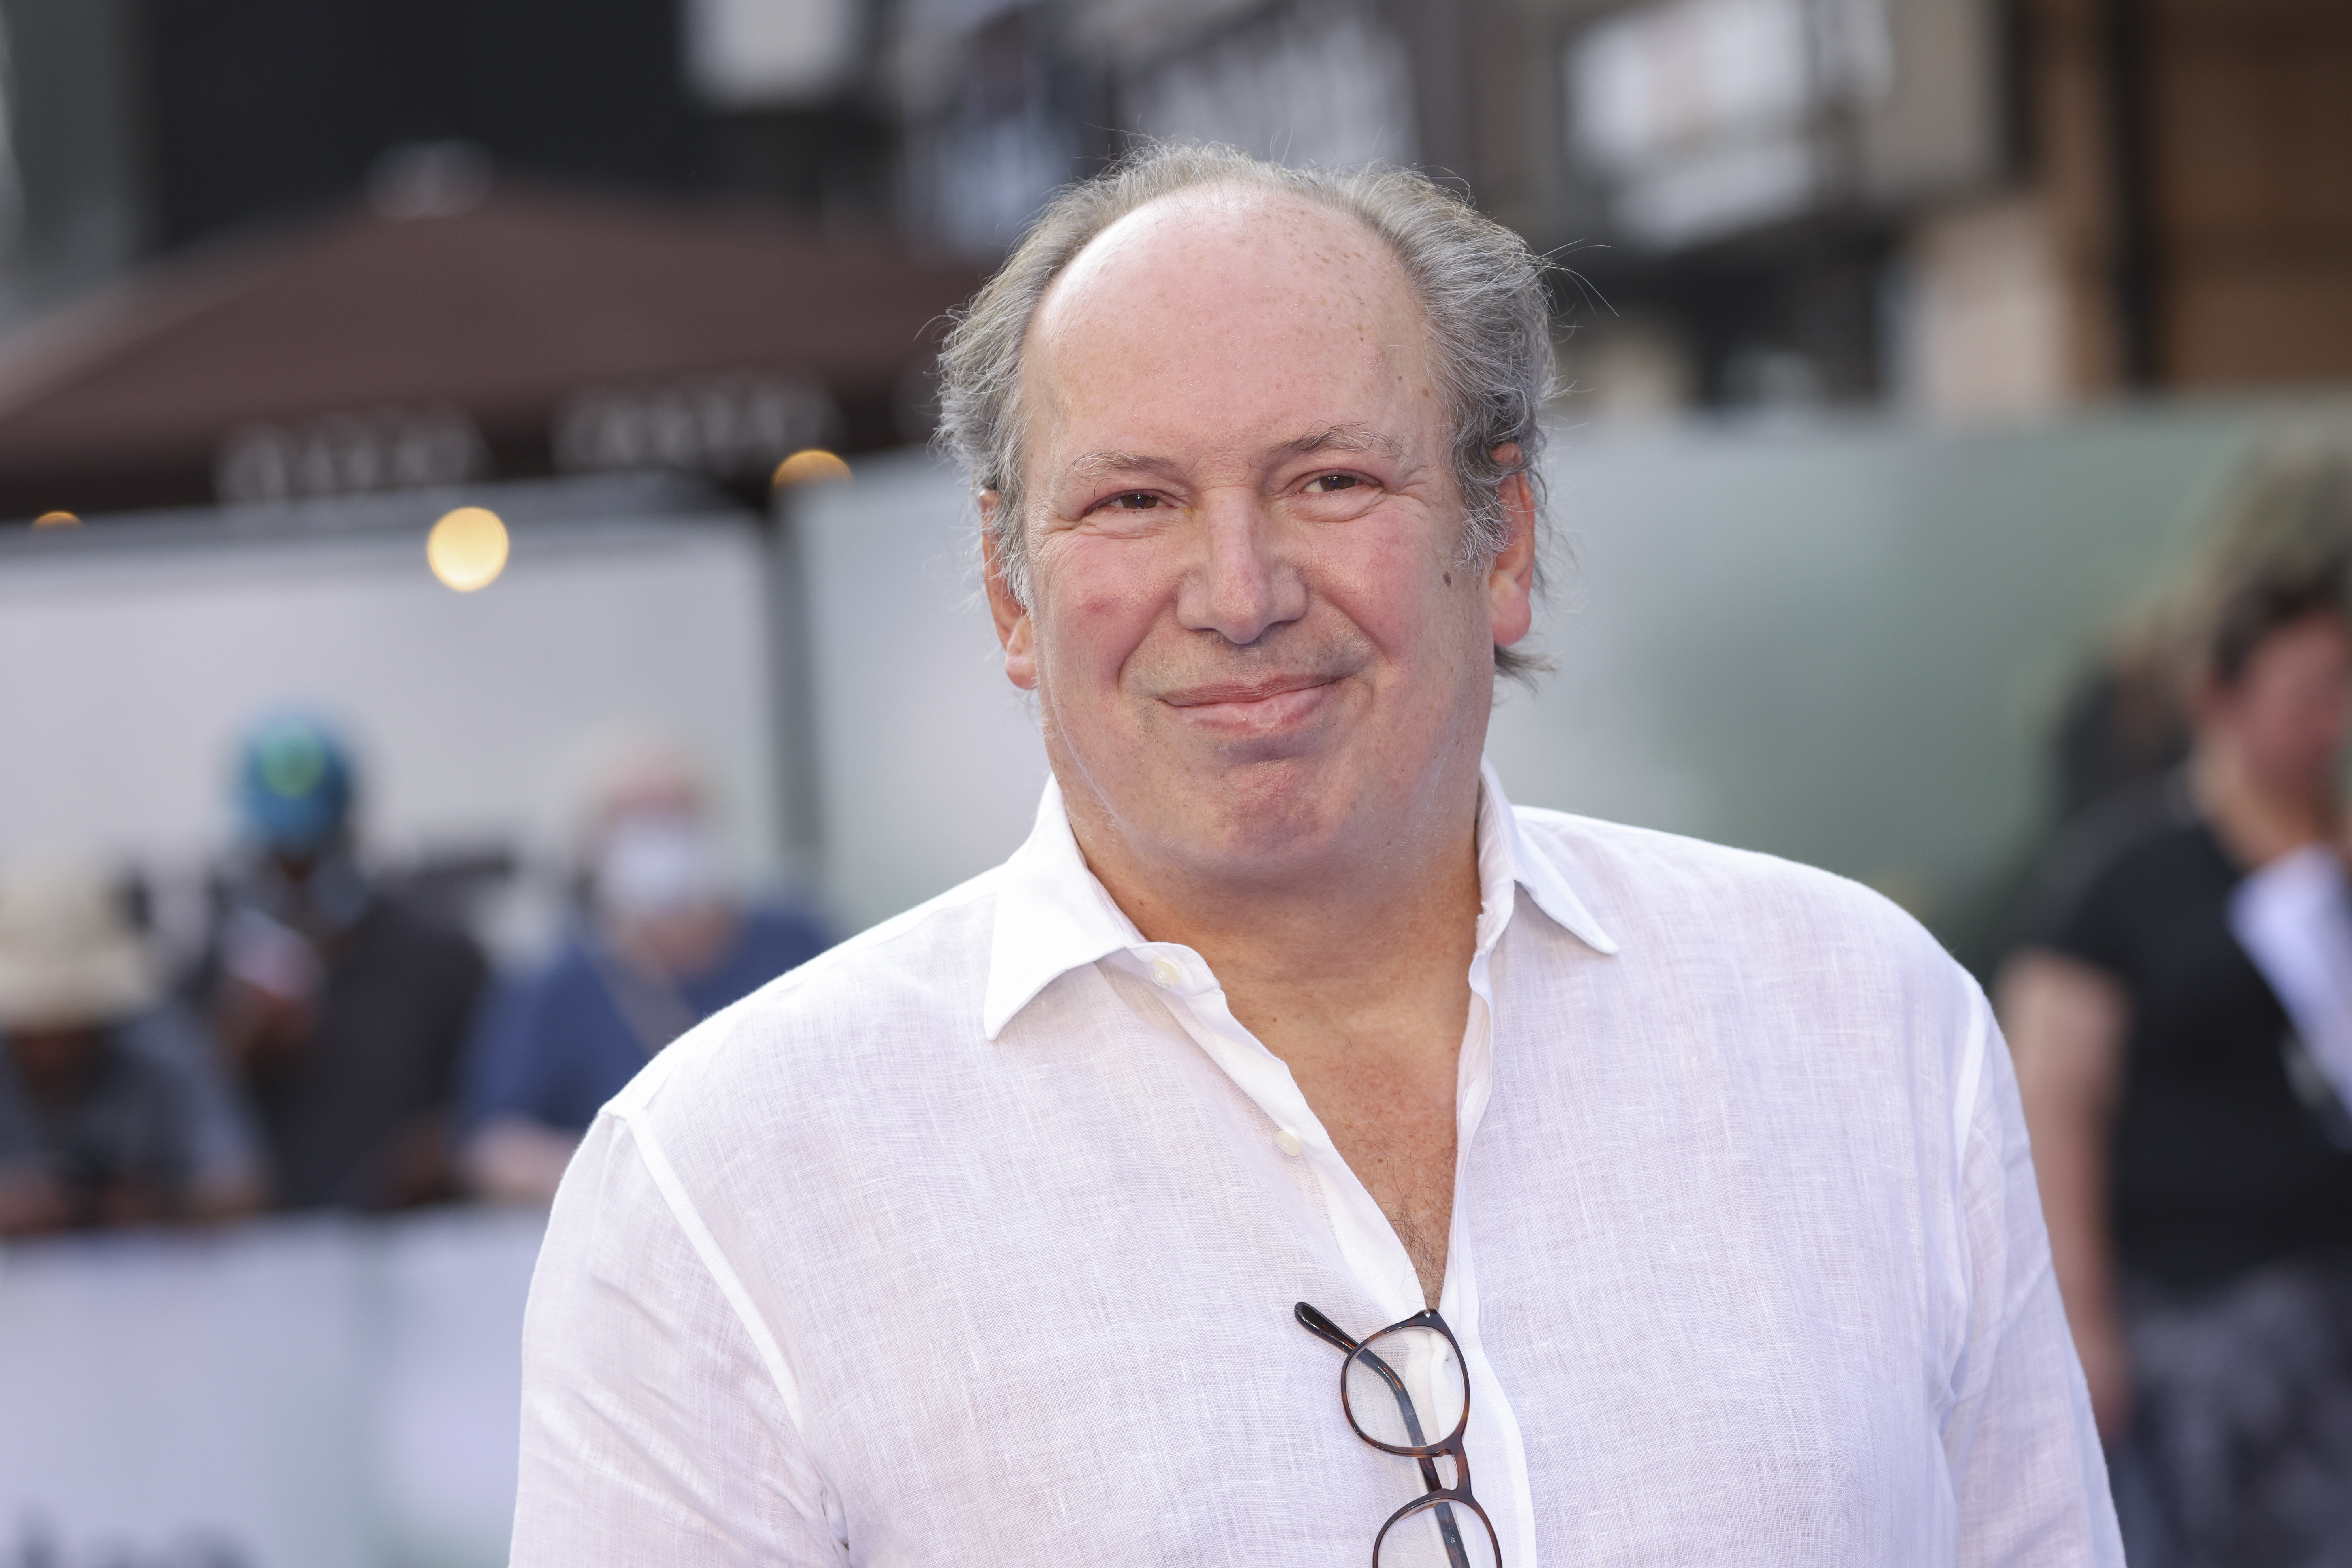 Hans Zimmer Got Standing Ovation While Proposing to Partner in London